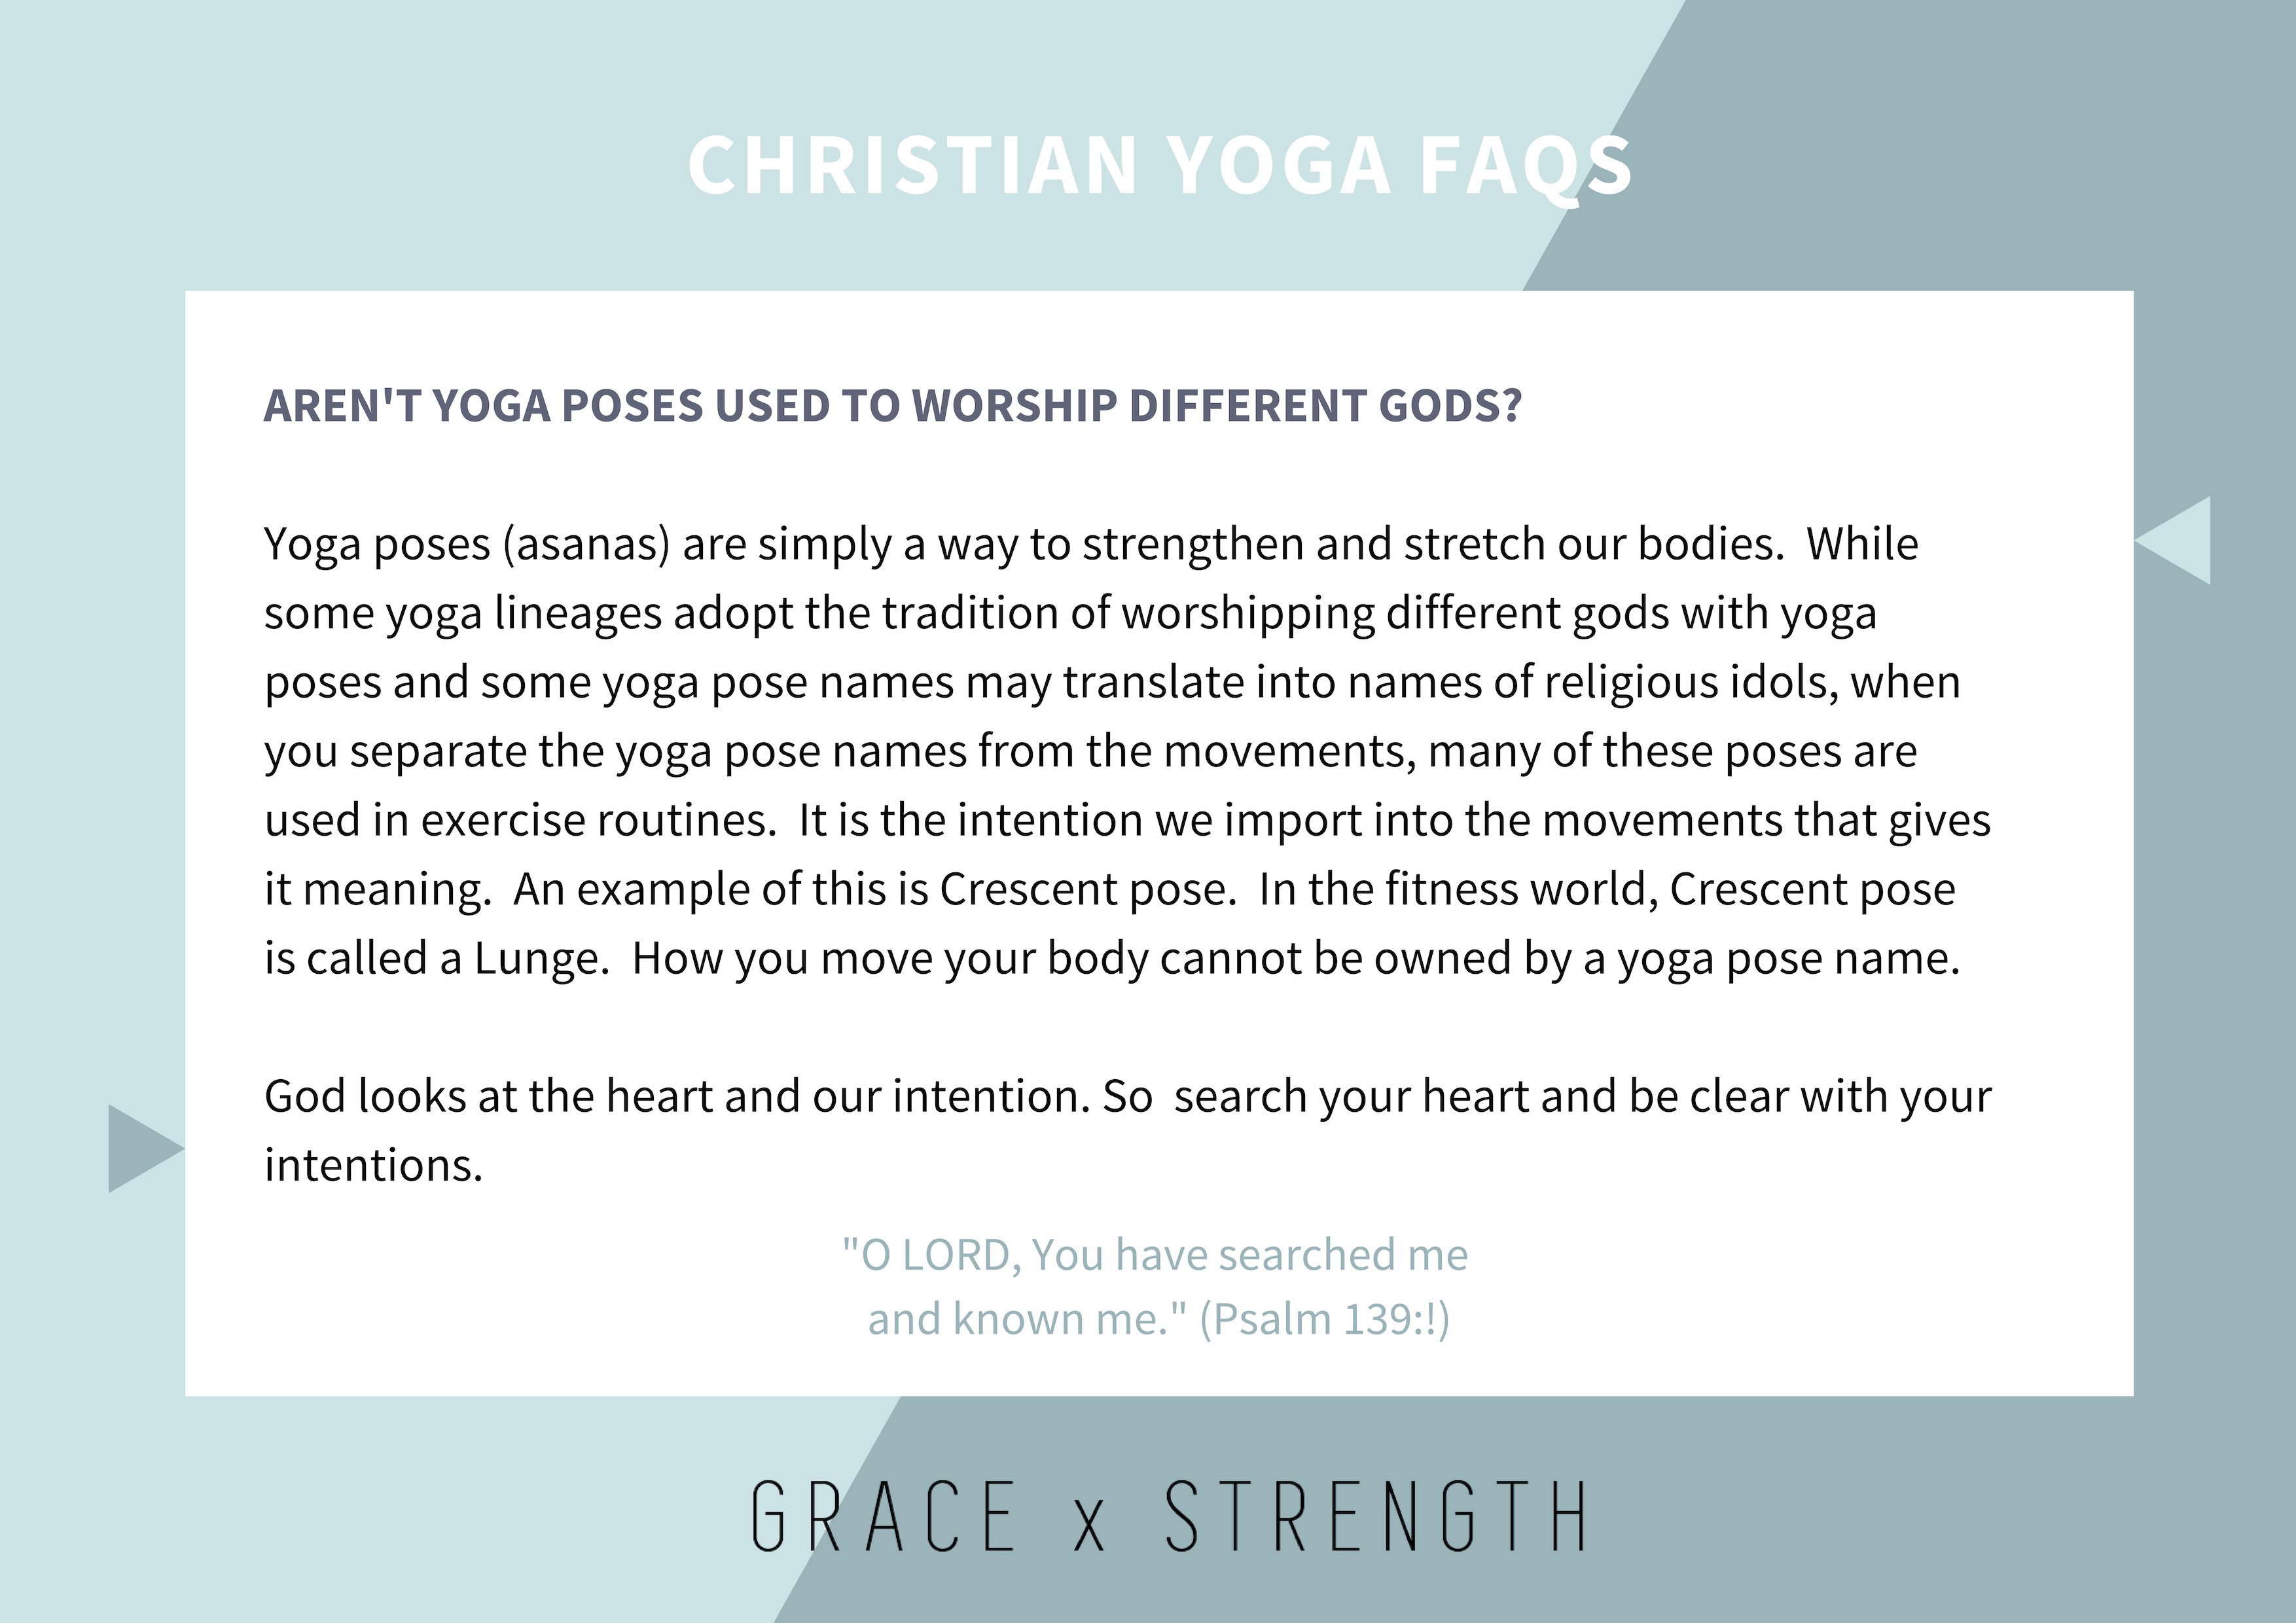 Aren’t yoga poses used to workshop different gods?